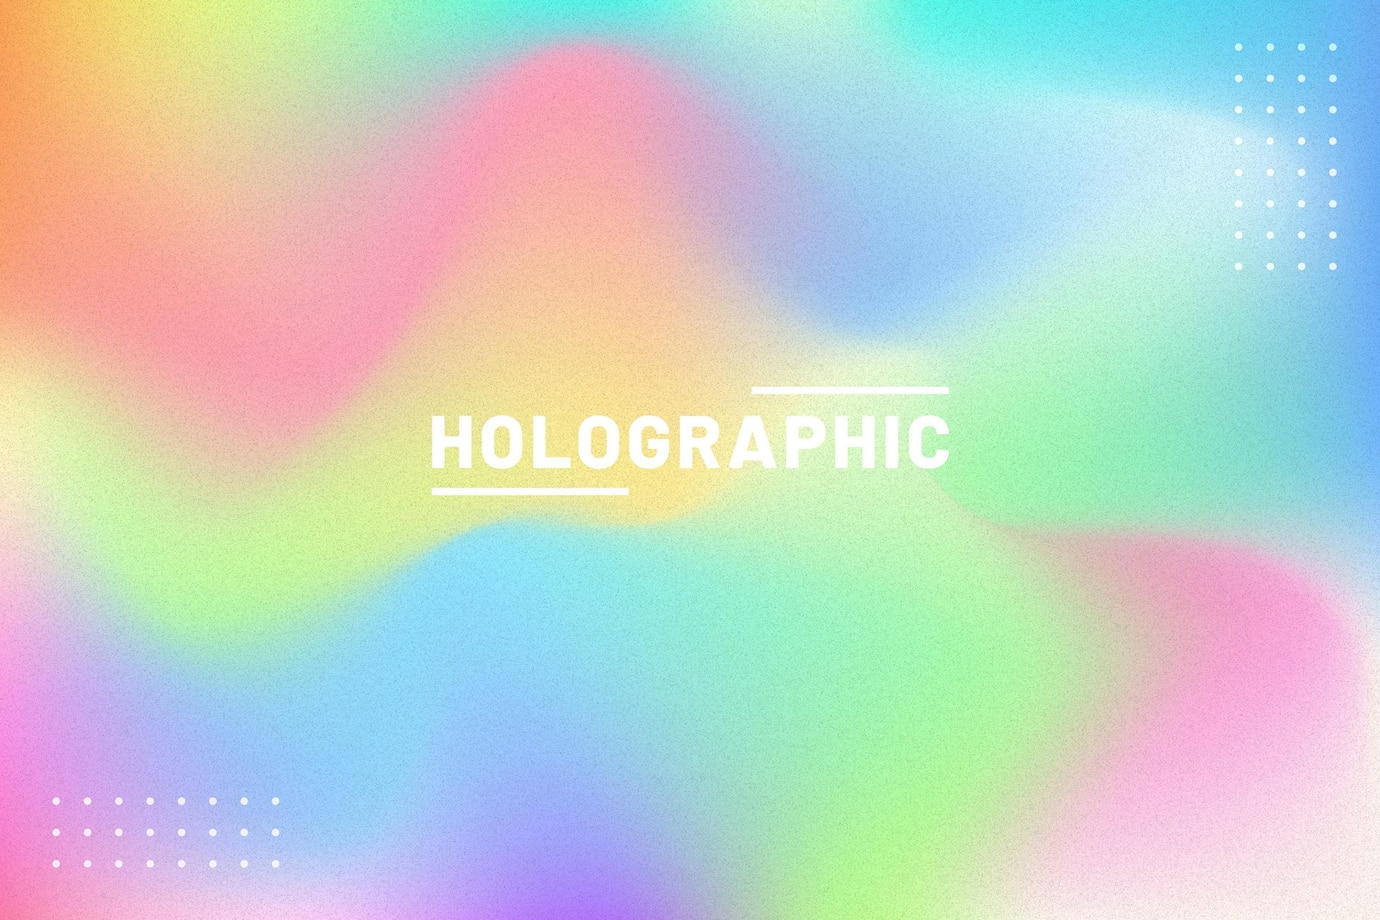 gradient-with-grain-holographic-banner-background_23-2149048014.jpg